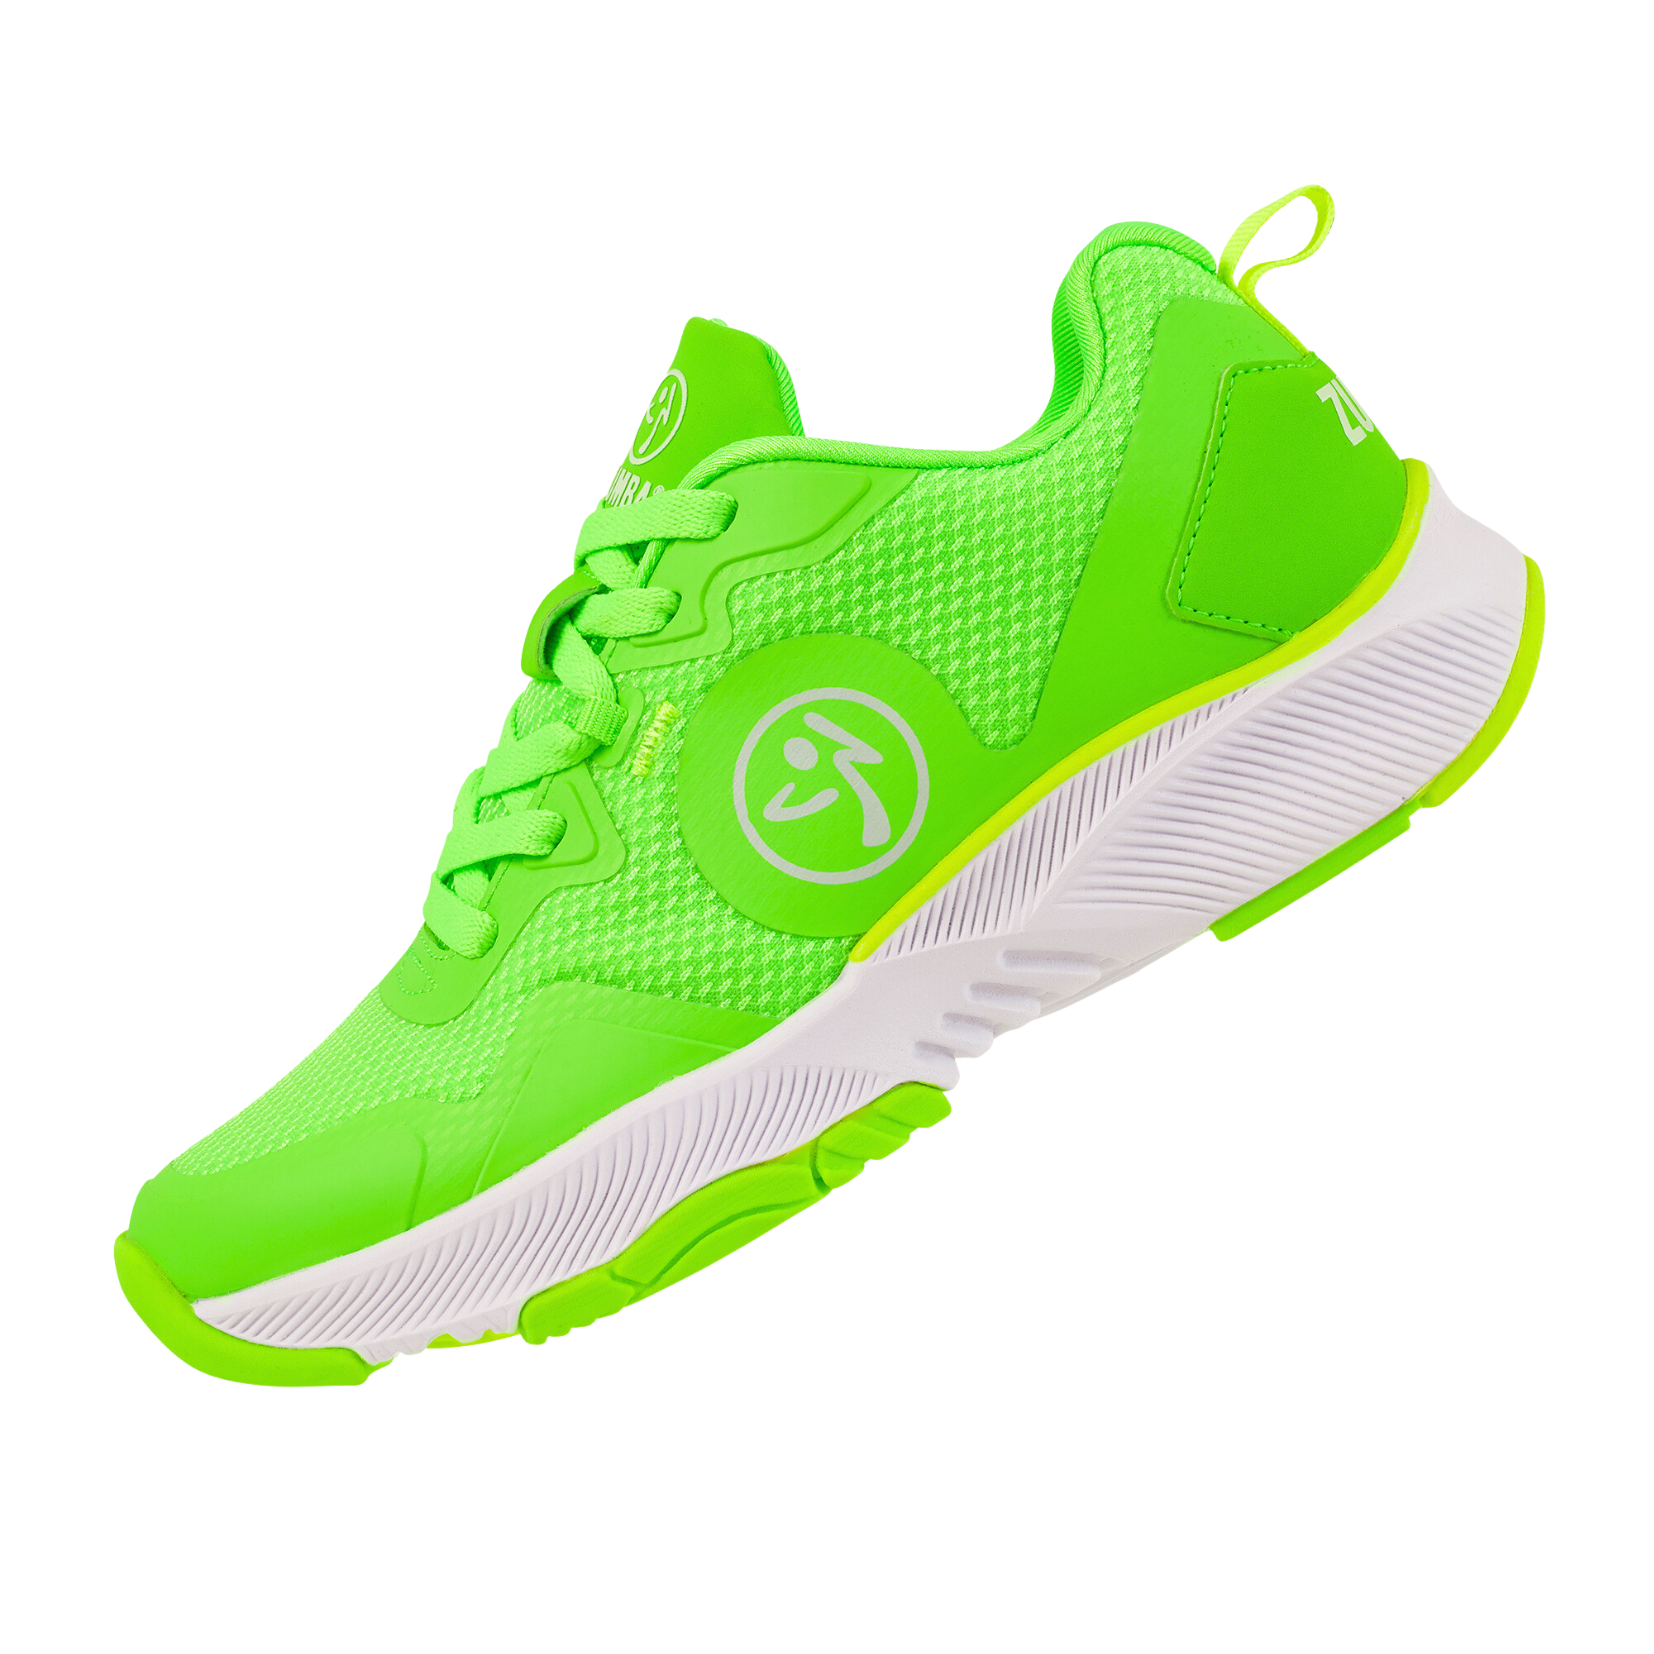 Zumba Train 2.0 - Green (Special Order)